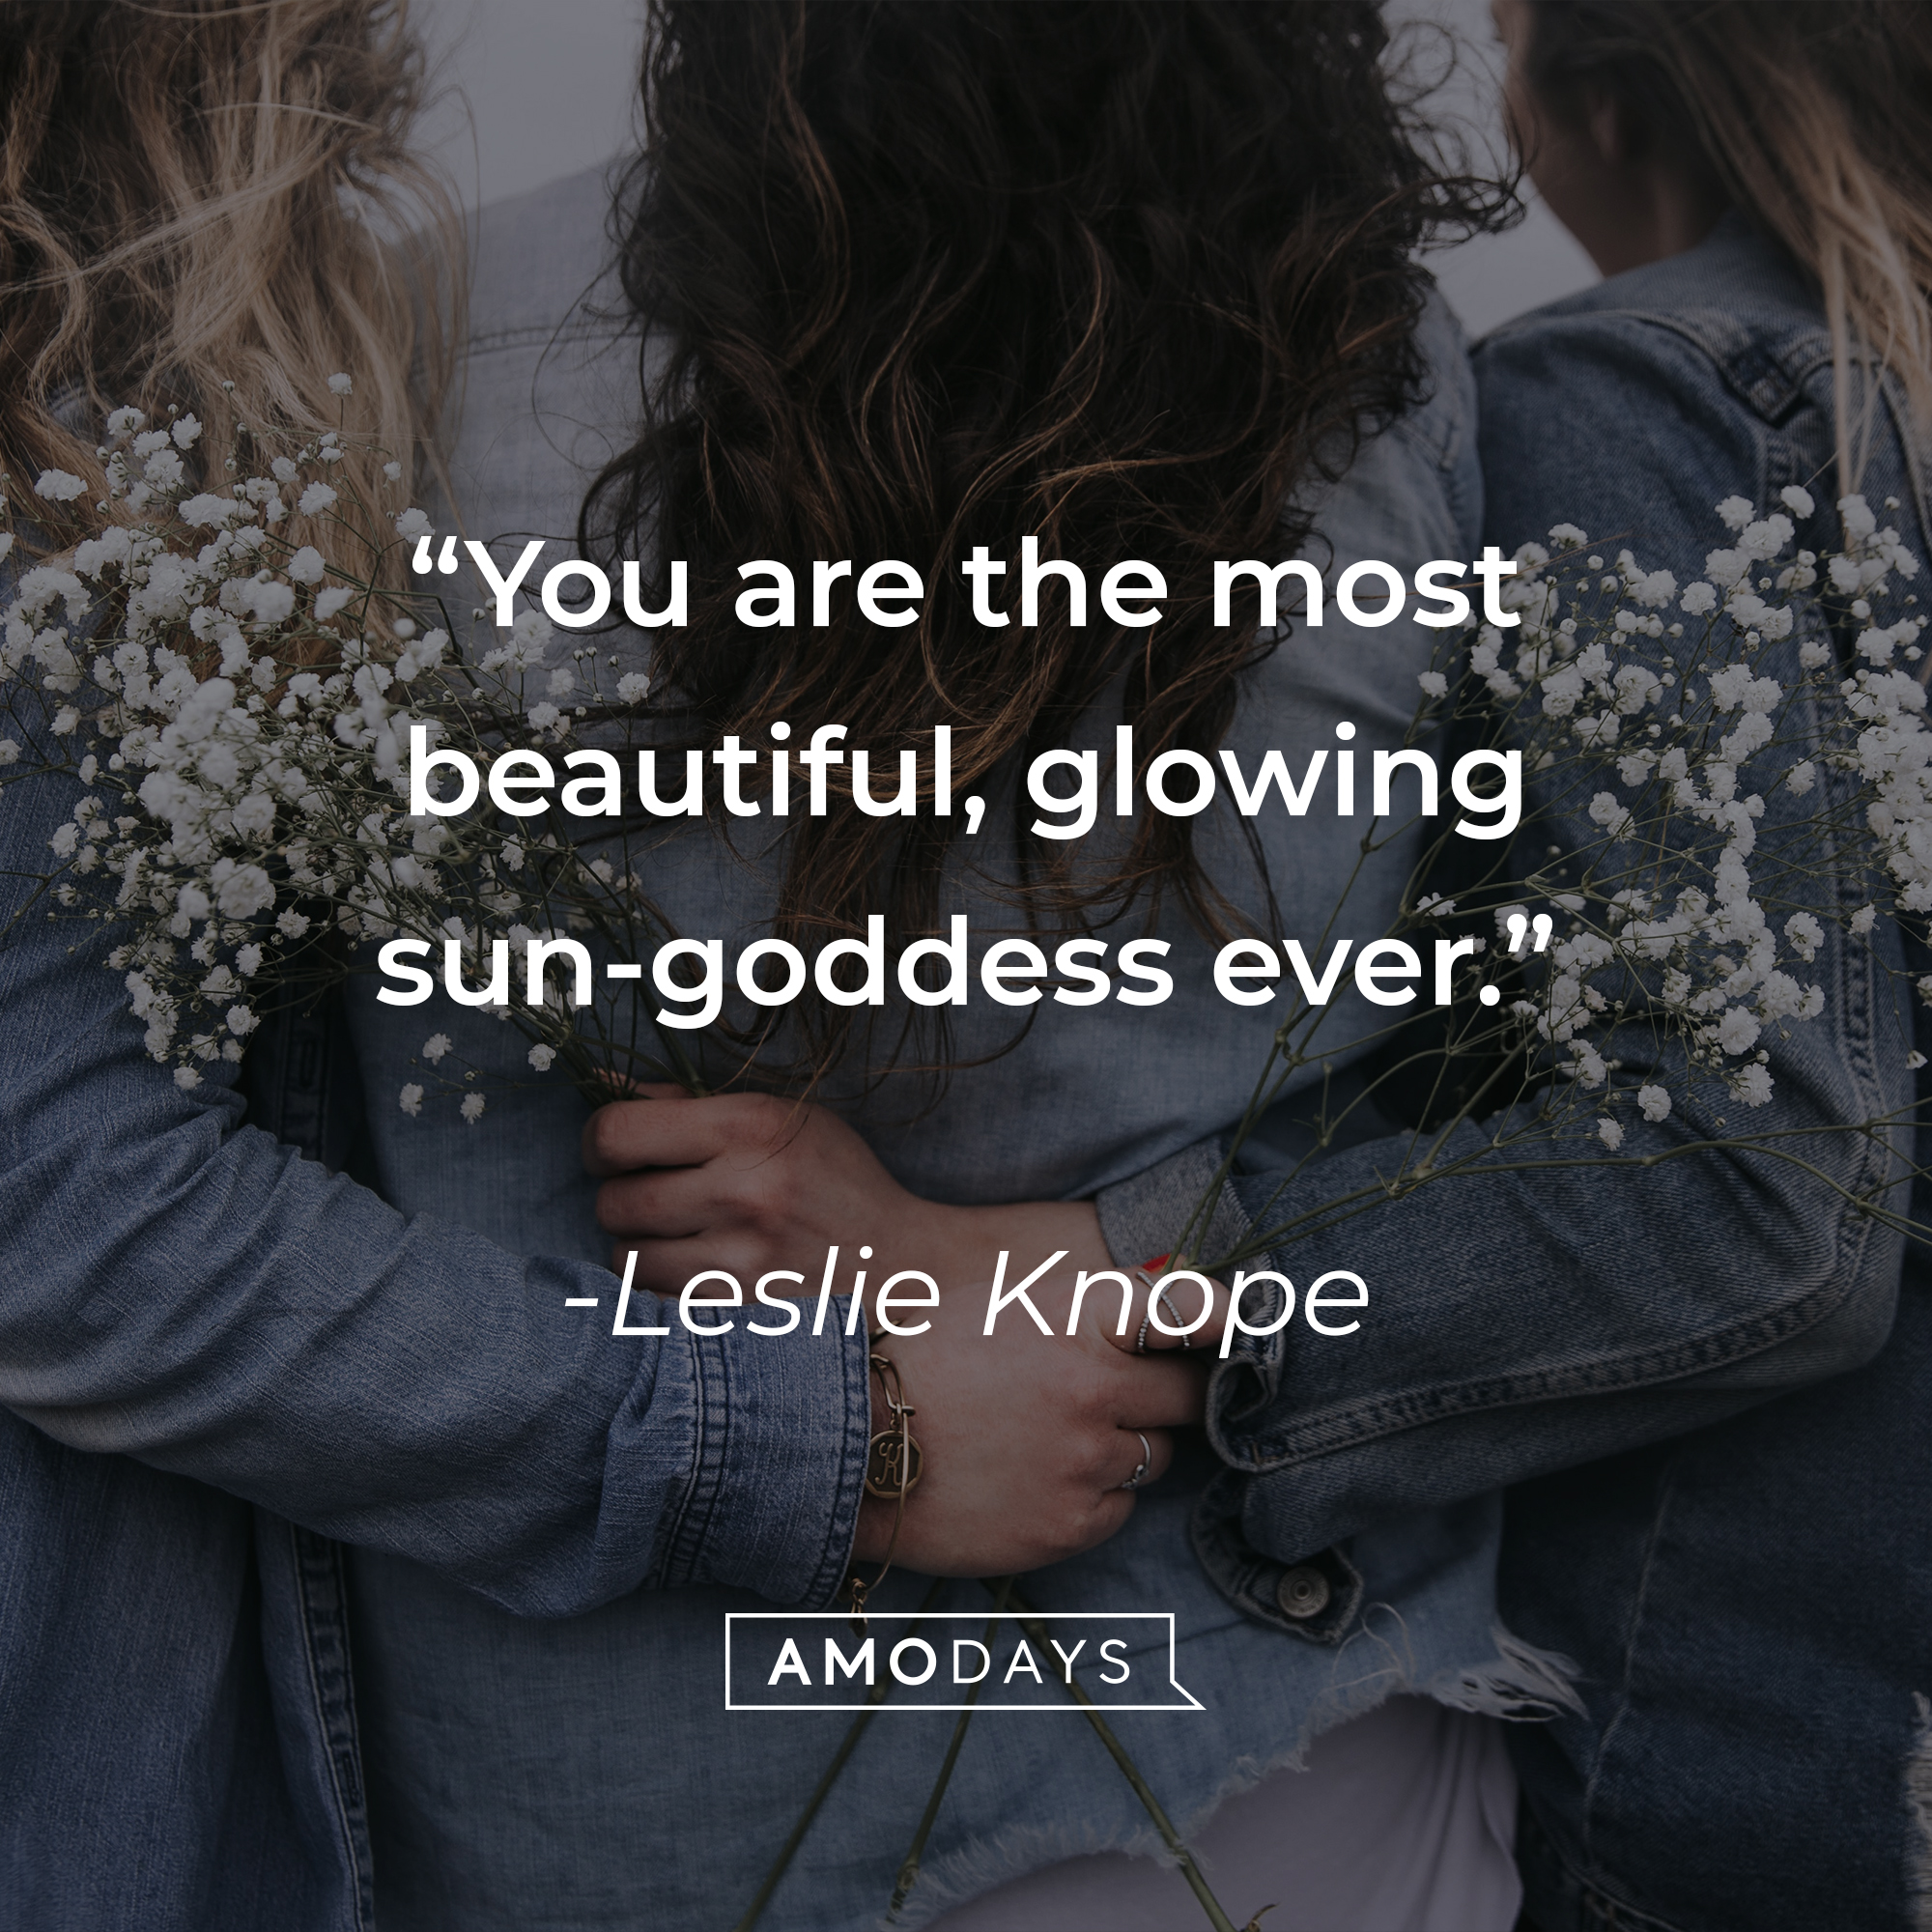 Leslie Knope's quote: "You are the most beautiful, glowing sun-goddess ever." | Source: Unsplash